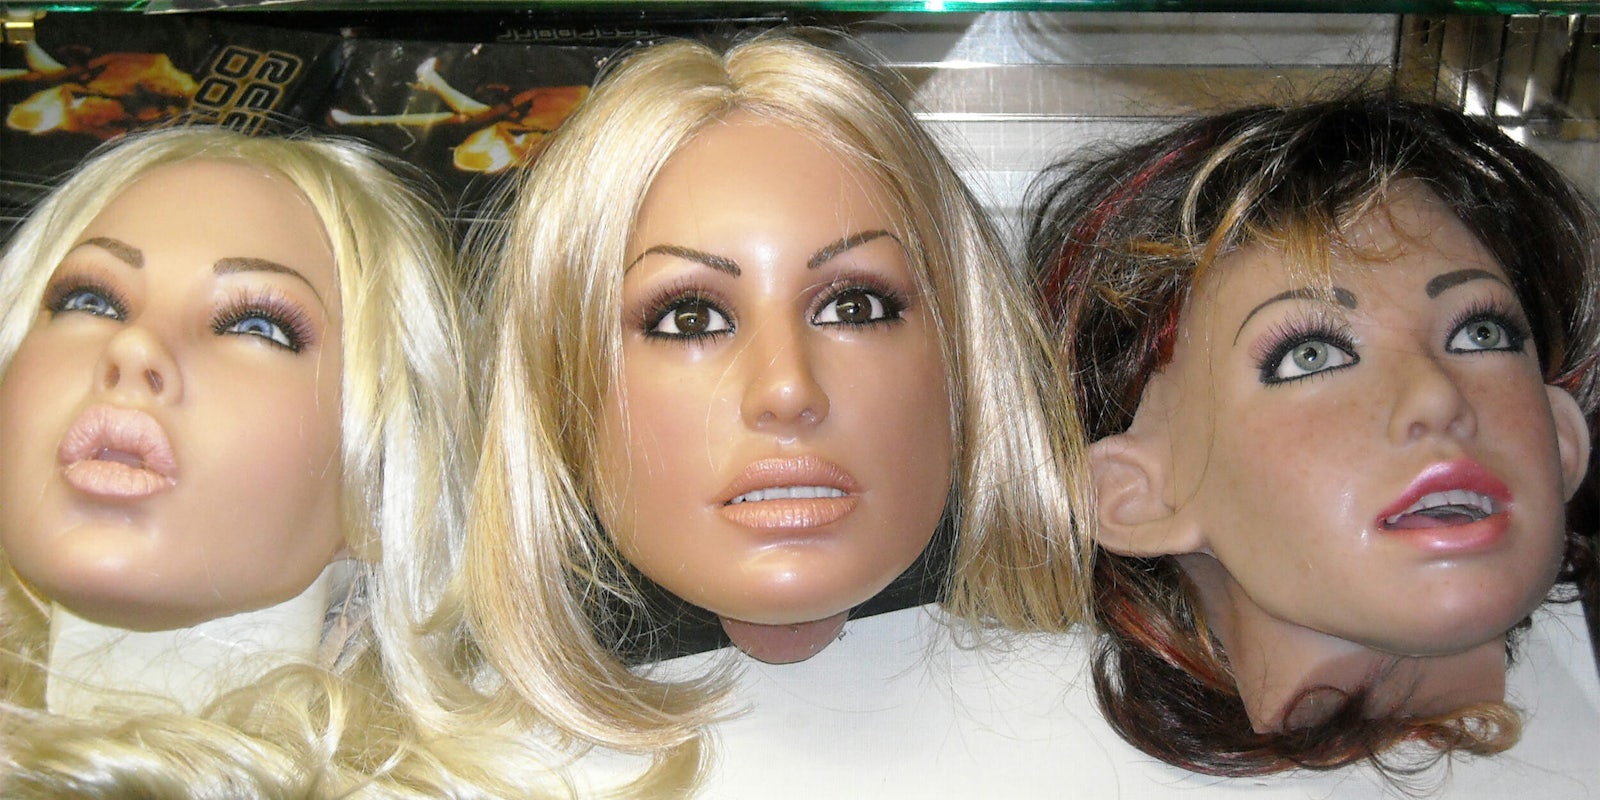 Real doll heads in case